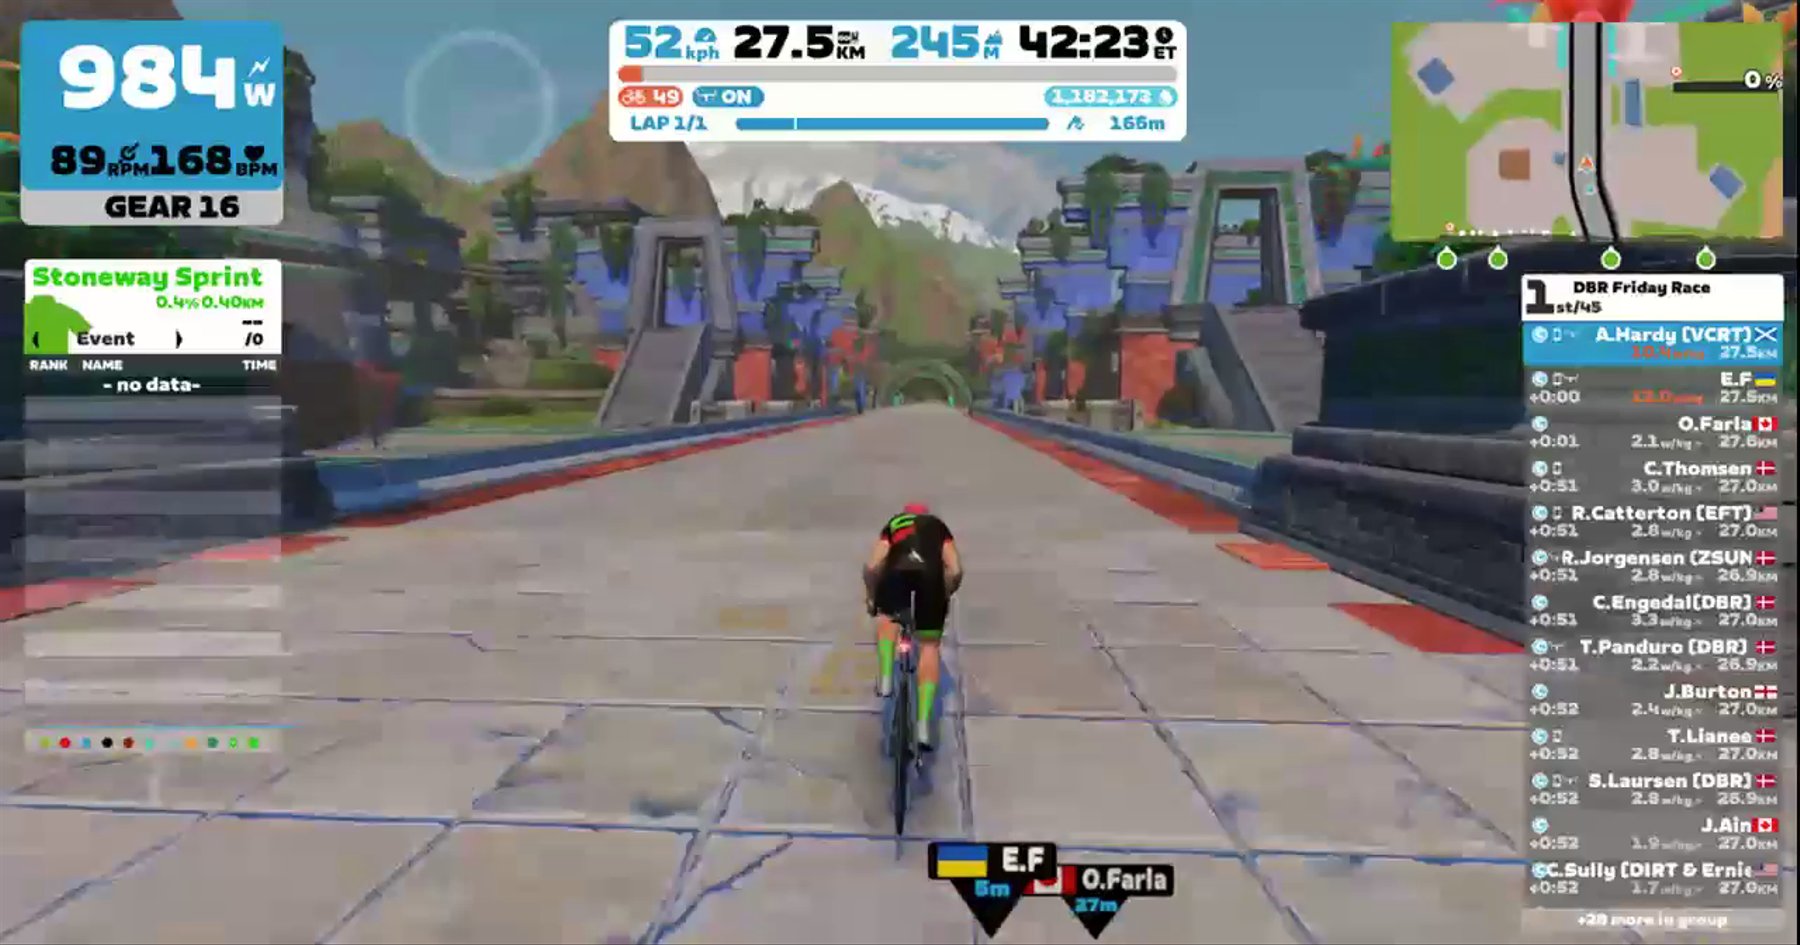 Zwift - Race: DBR Friday Race  (C) on Canopies and Coastlines in Watopia